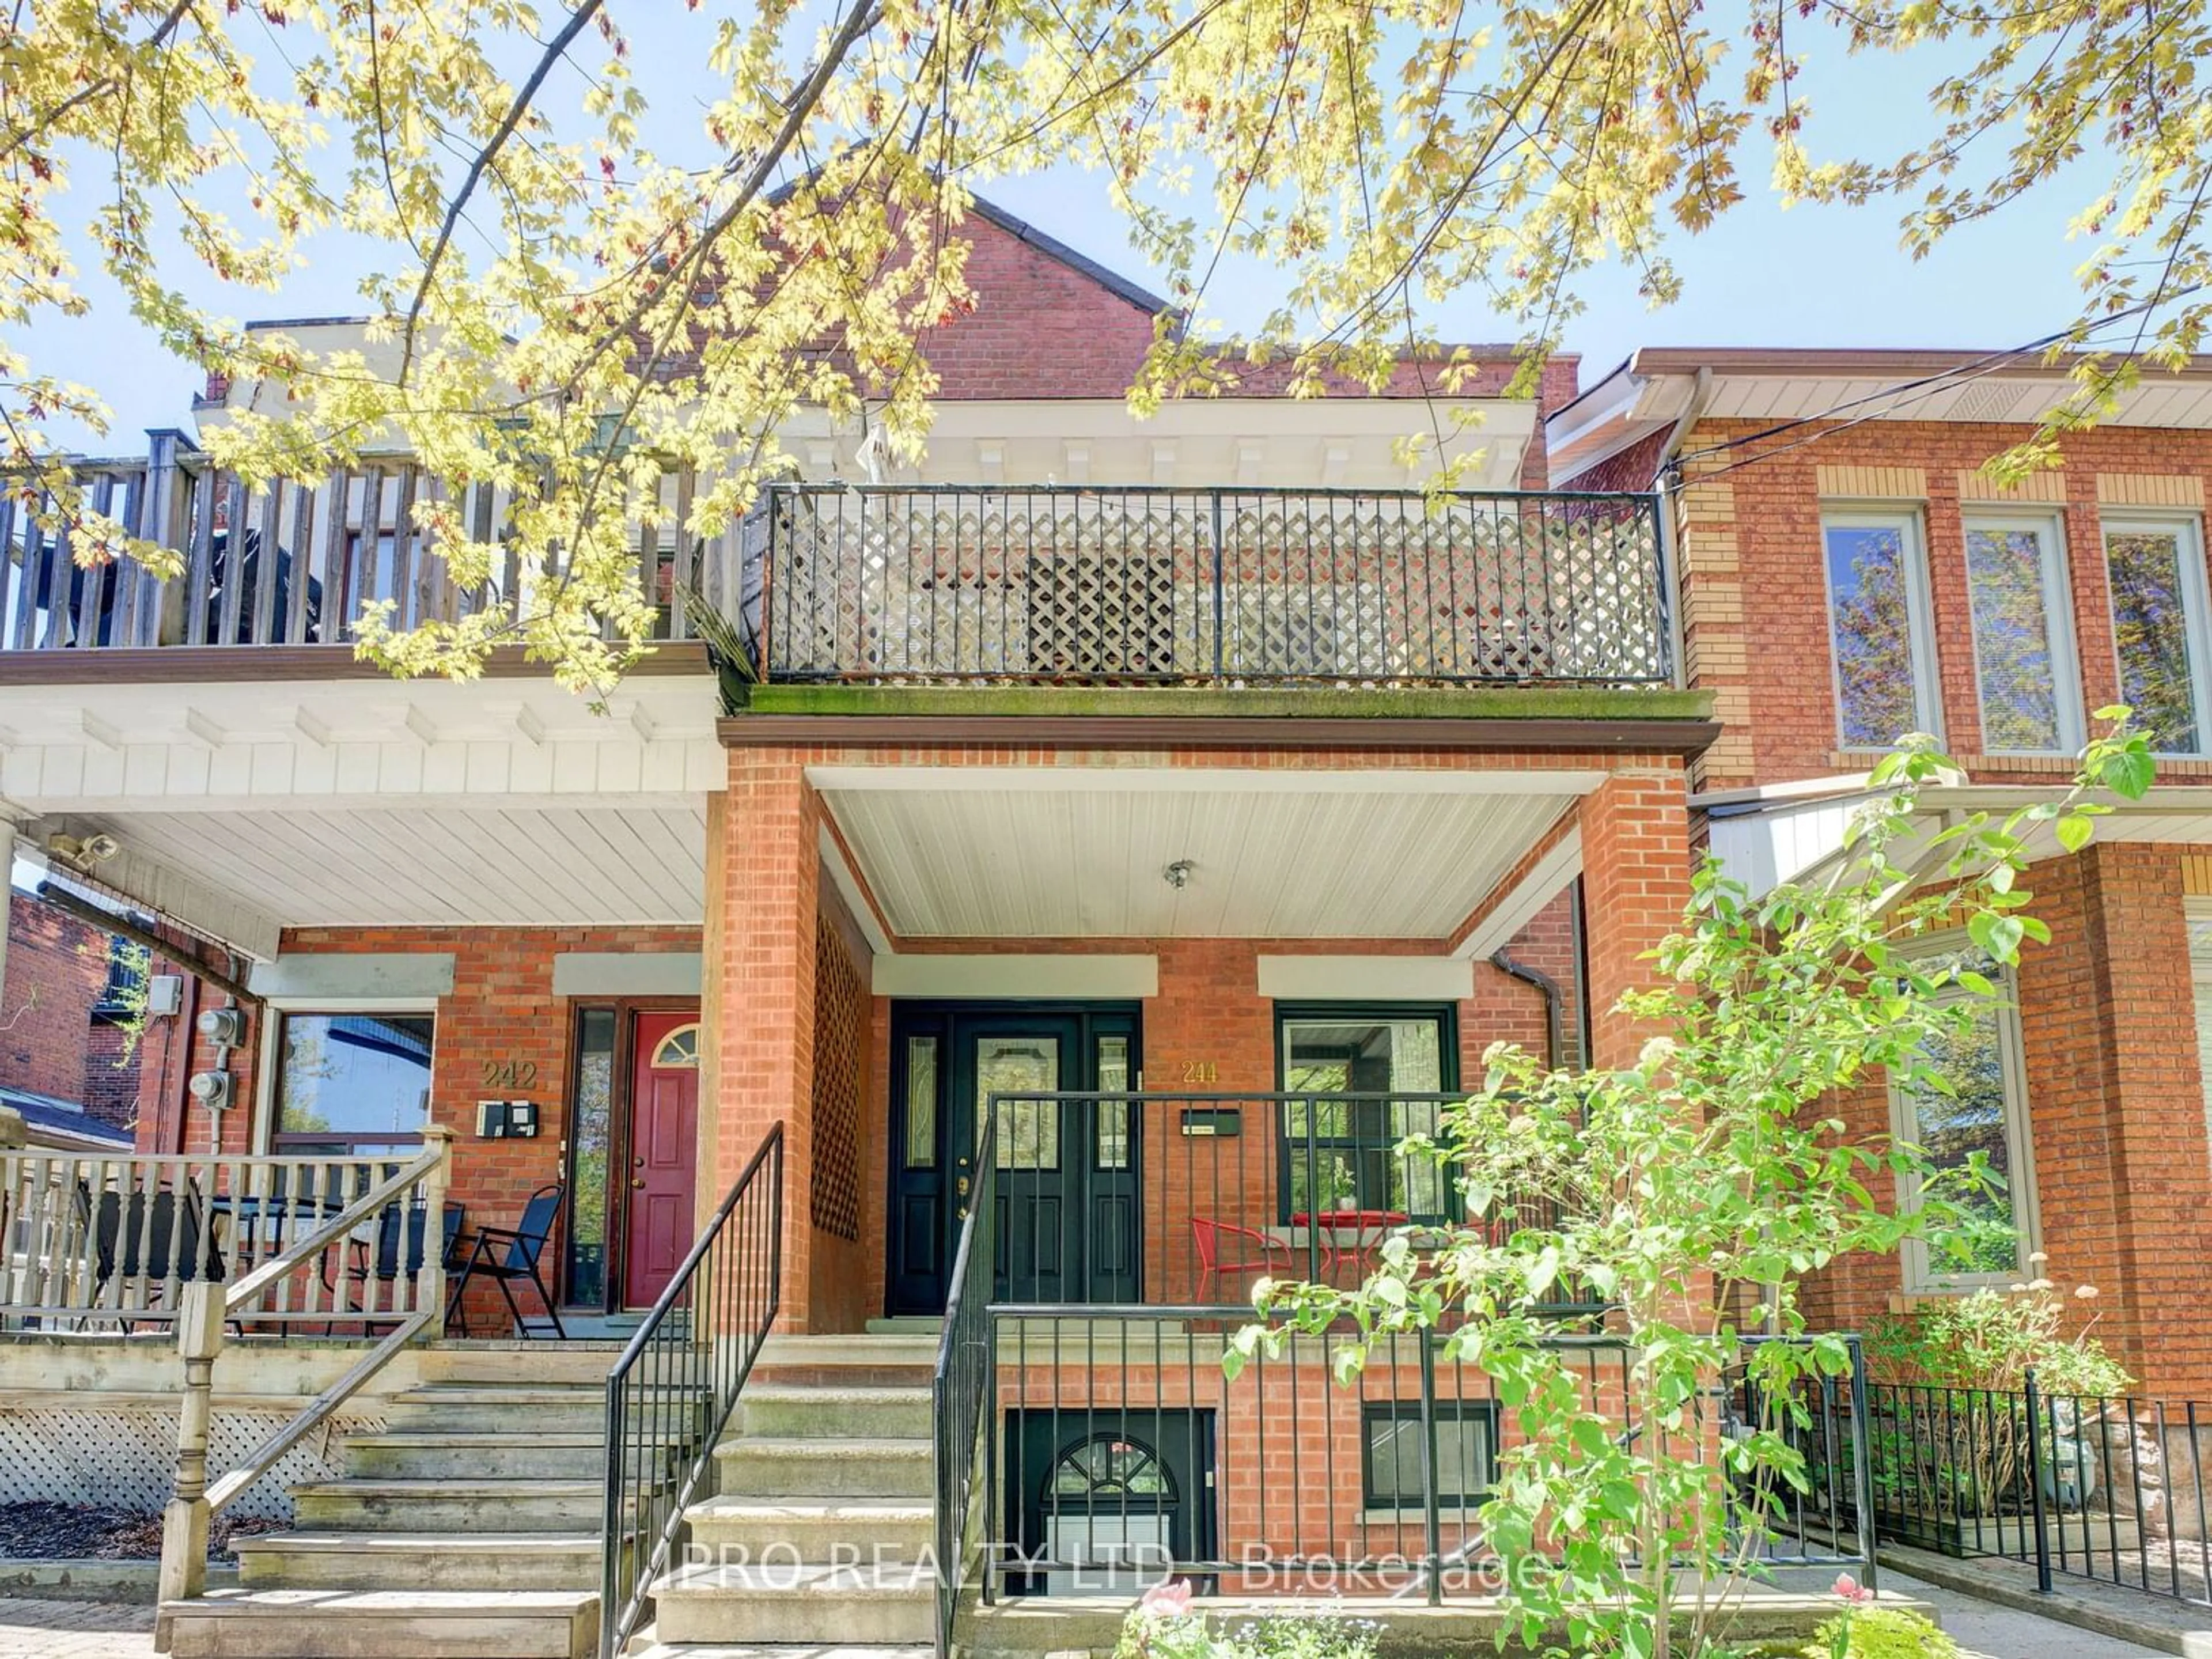 Home with brick exterior material for 244 Shaw St, Toronto Ontario M6J 2W9